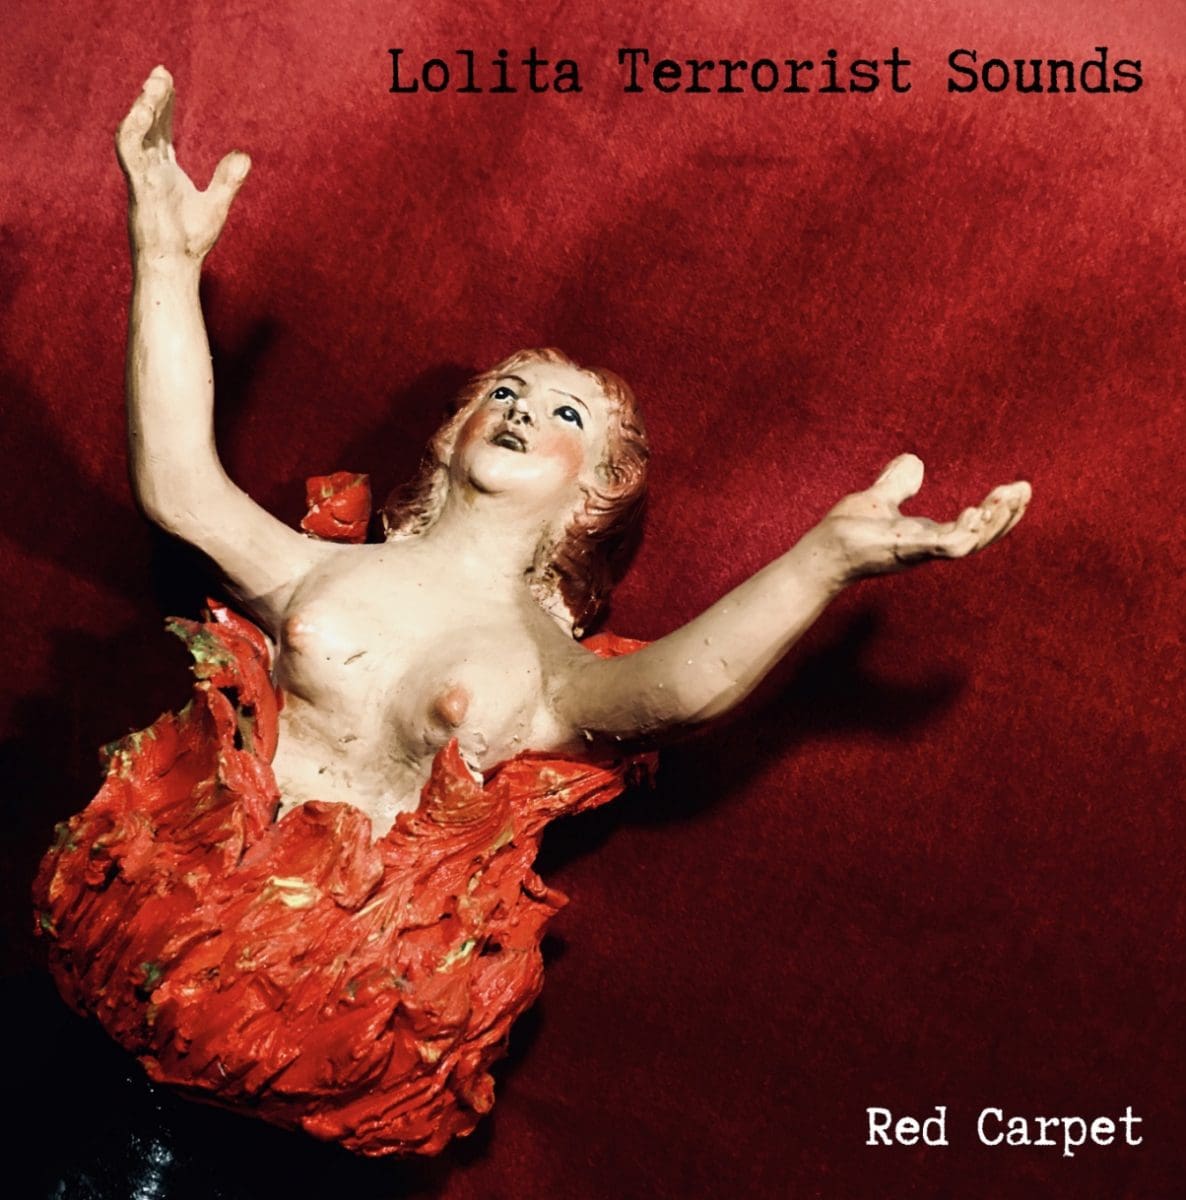 Lolita Terrorist Sounds release new single and video 'Red Carpet'